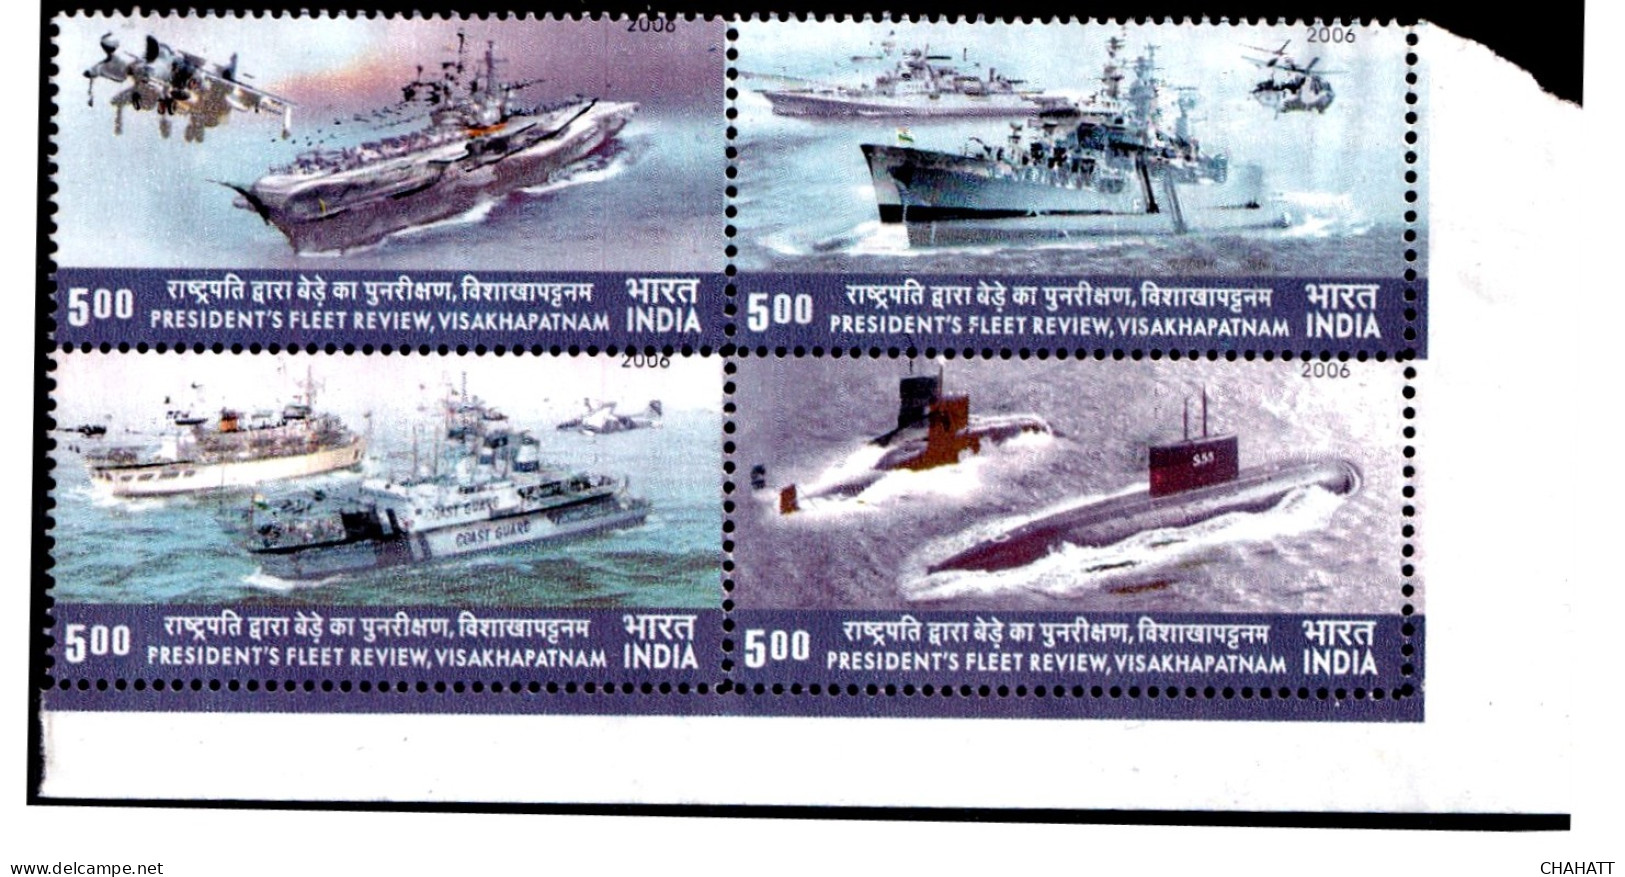 INDIA-2006- PRESIDENT'S FLEET REVIEW- ERROR- HELICOPTERS- NAVAL SHIPS-GHOST IMAGES- SETENANT BLK OF 4-MNH-IE-47 - Errors, Freaks & Oddities (EFO)